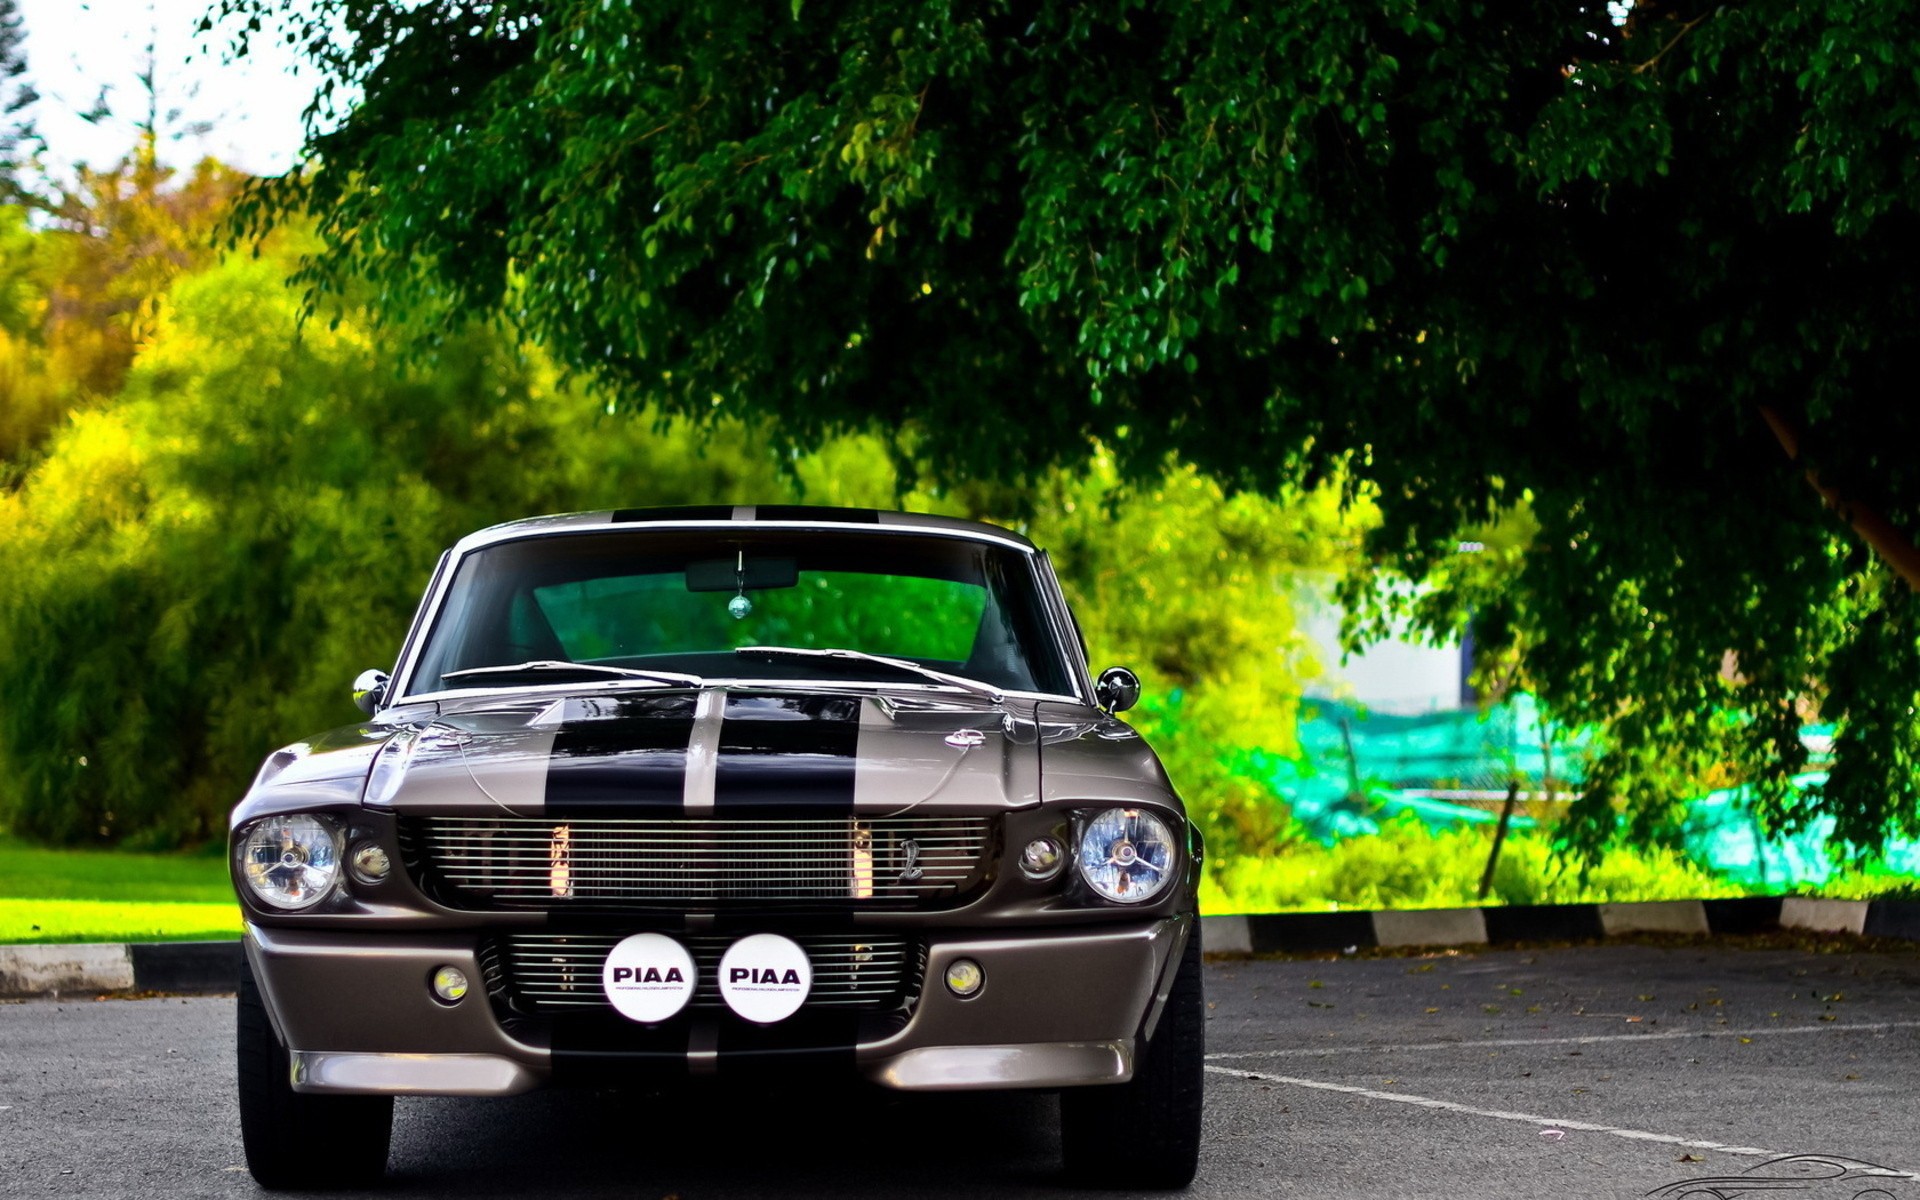 General 1920x1200 Shelby car Ford Mustang Ford Mustang Shelby Ford vehicle trees